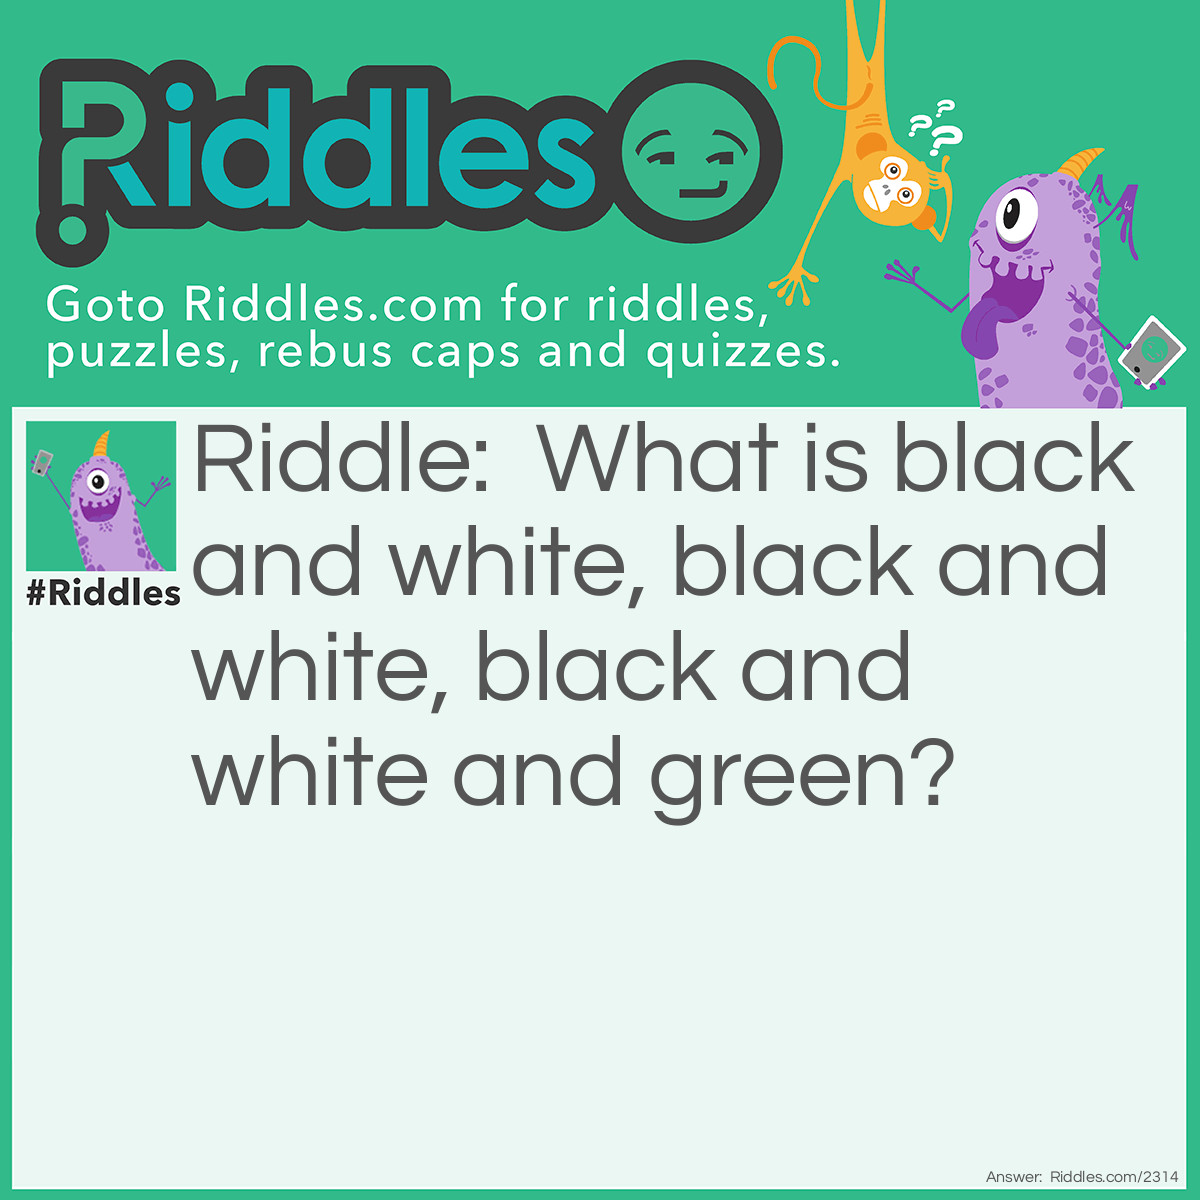 Riddle: What is black and white, black and white, black and white and green? Answer: Three skunks eating a pickle.